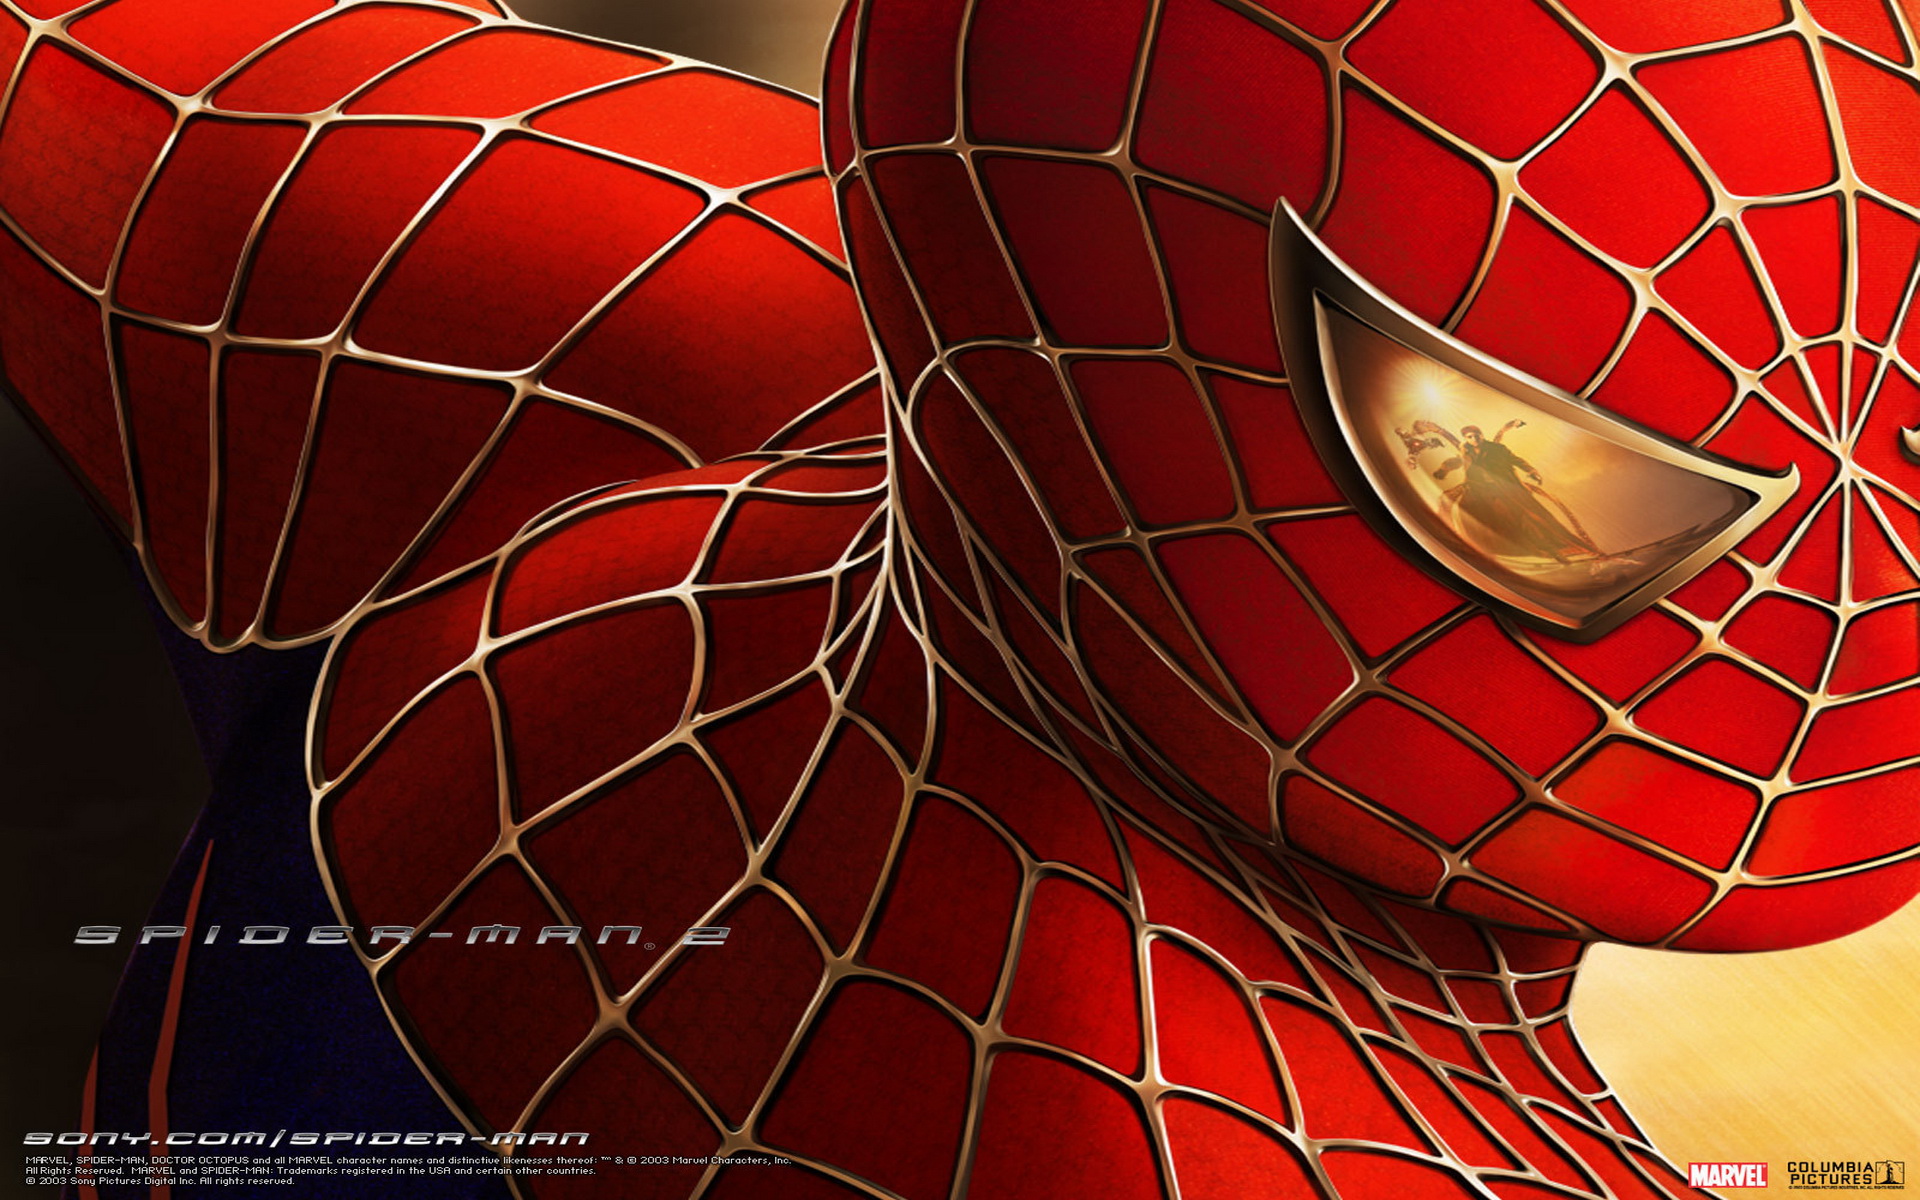  spiderman  wallpapers  photos and desktop backgrounds  up to 